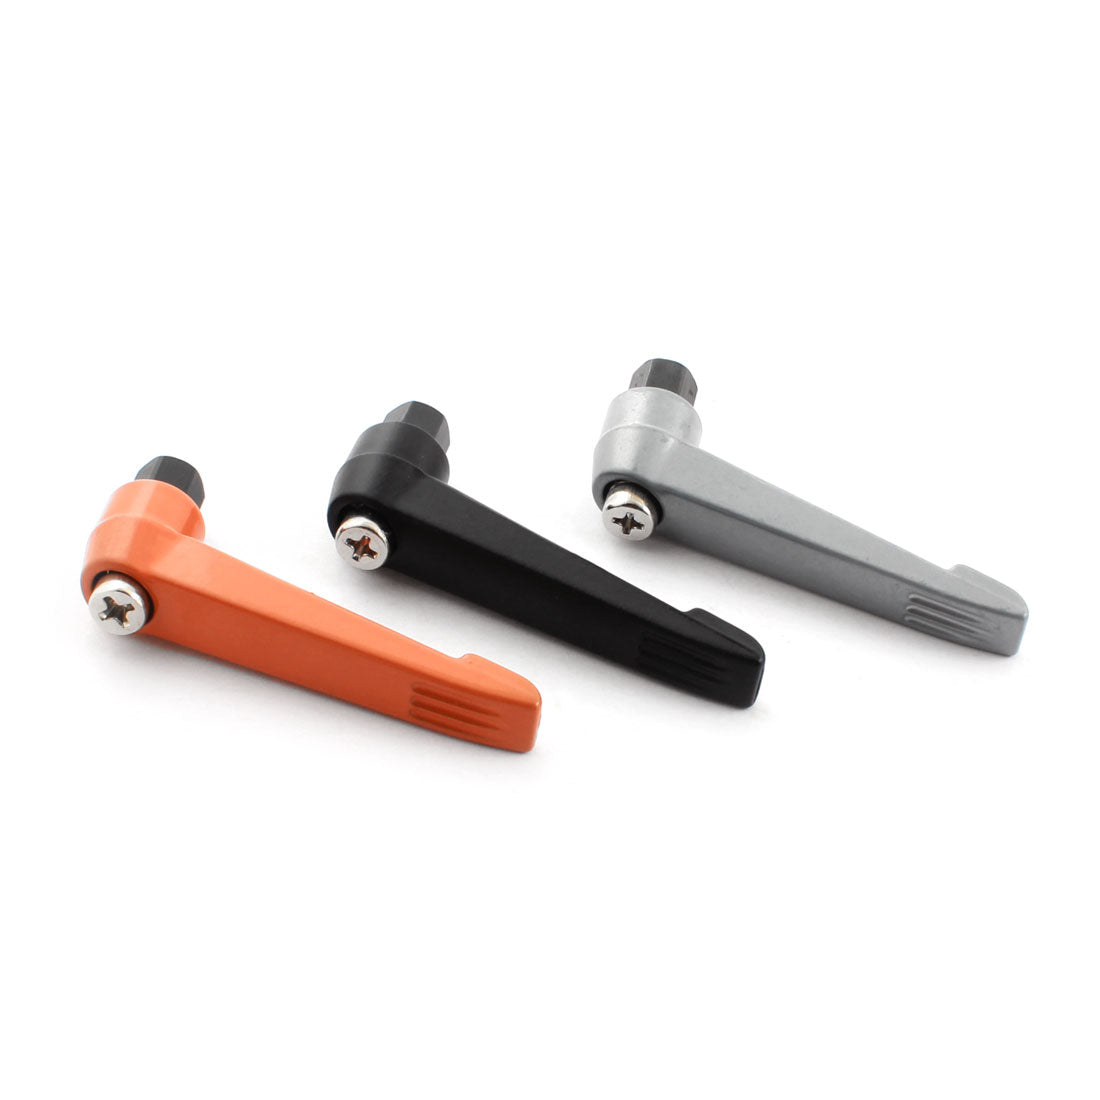 uxcell Uxcell 3Pcs M5 Female Thread 60mm Long Adjustable Metal Knob Handle Lever Silver Tone Black Orange for Machinery